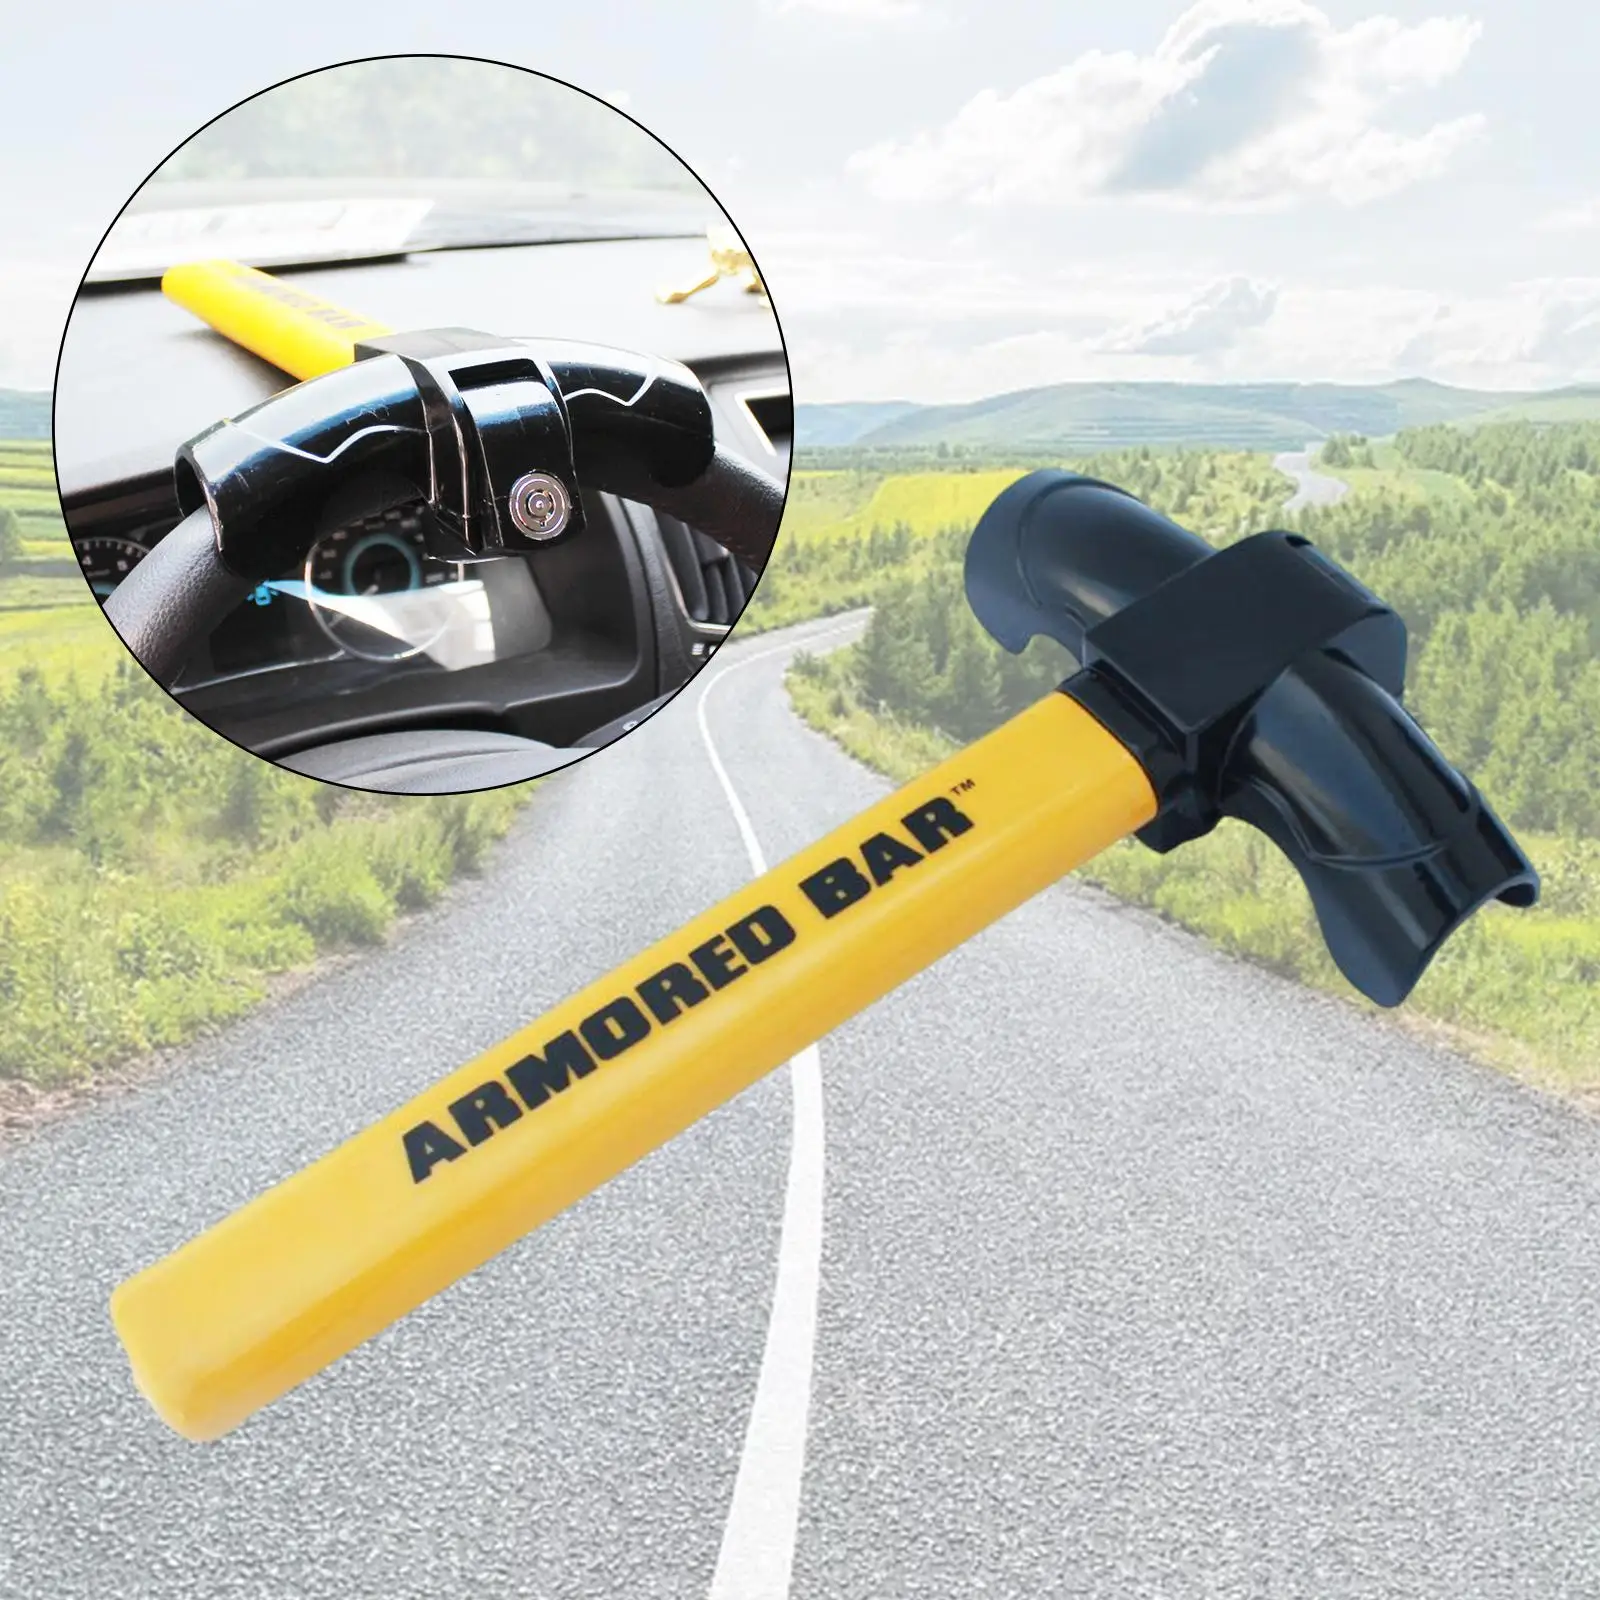 Automotive Steering Wheel Lock with 2x Keys Sturdy Heavy Duty Universal Convenient Anti Theft T Shaped for Vehicles Truck